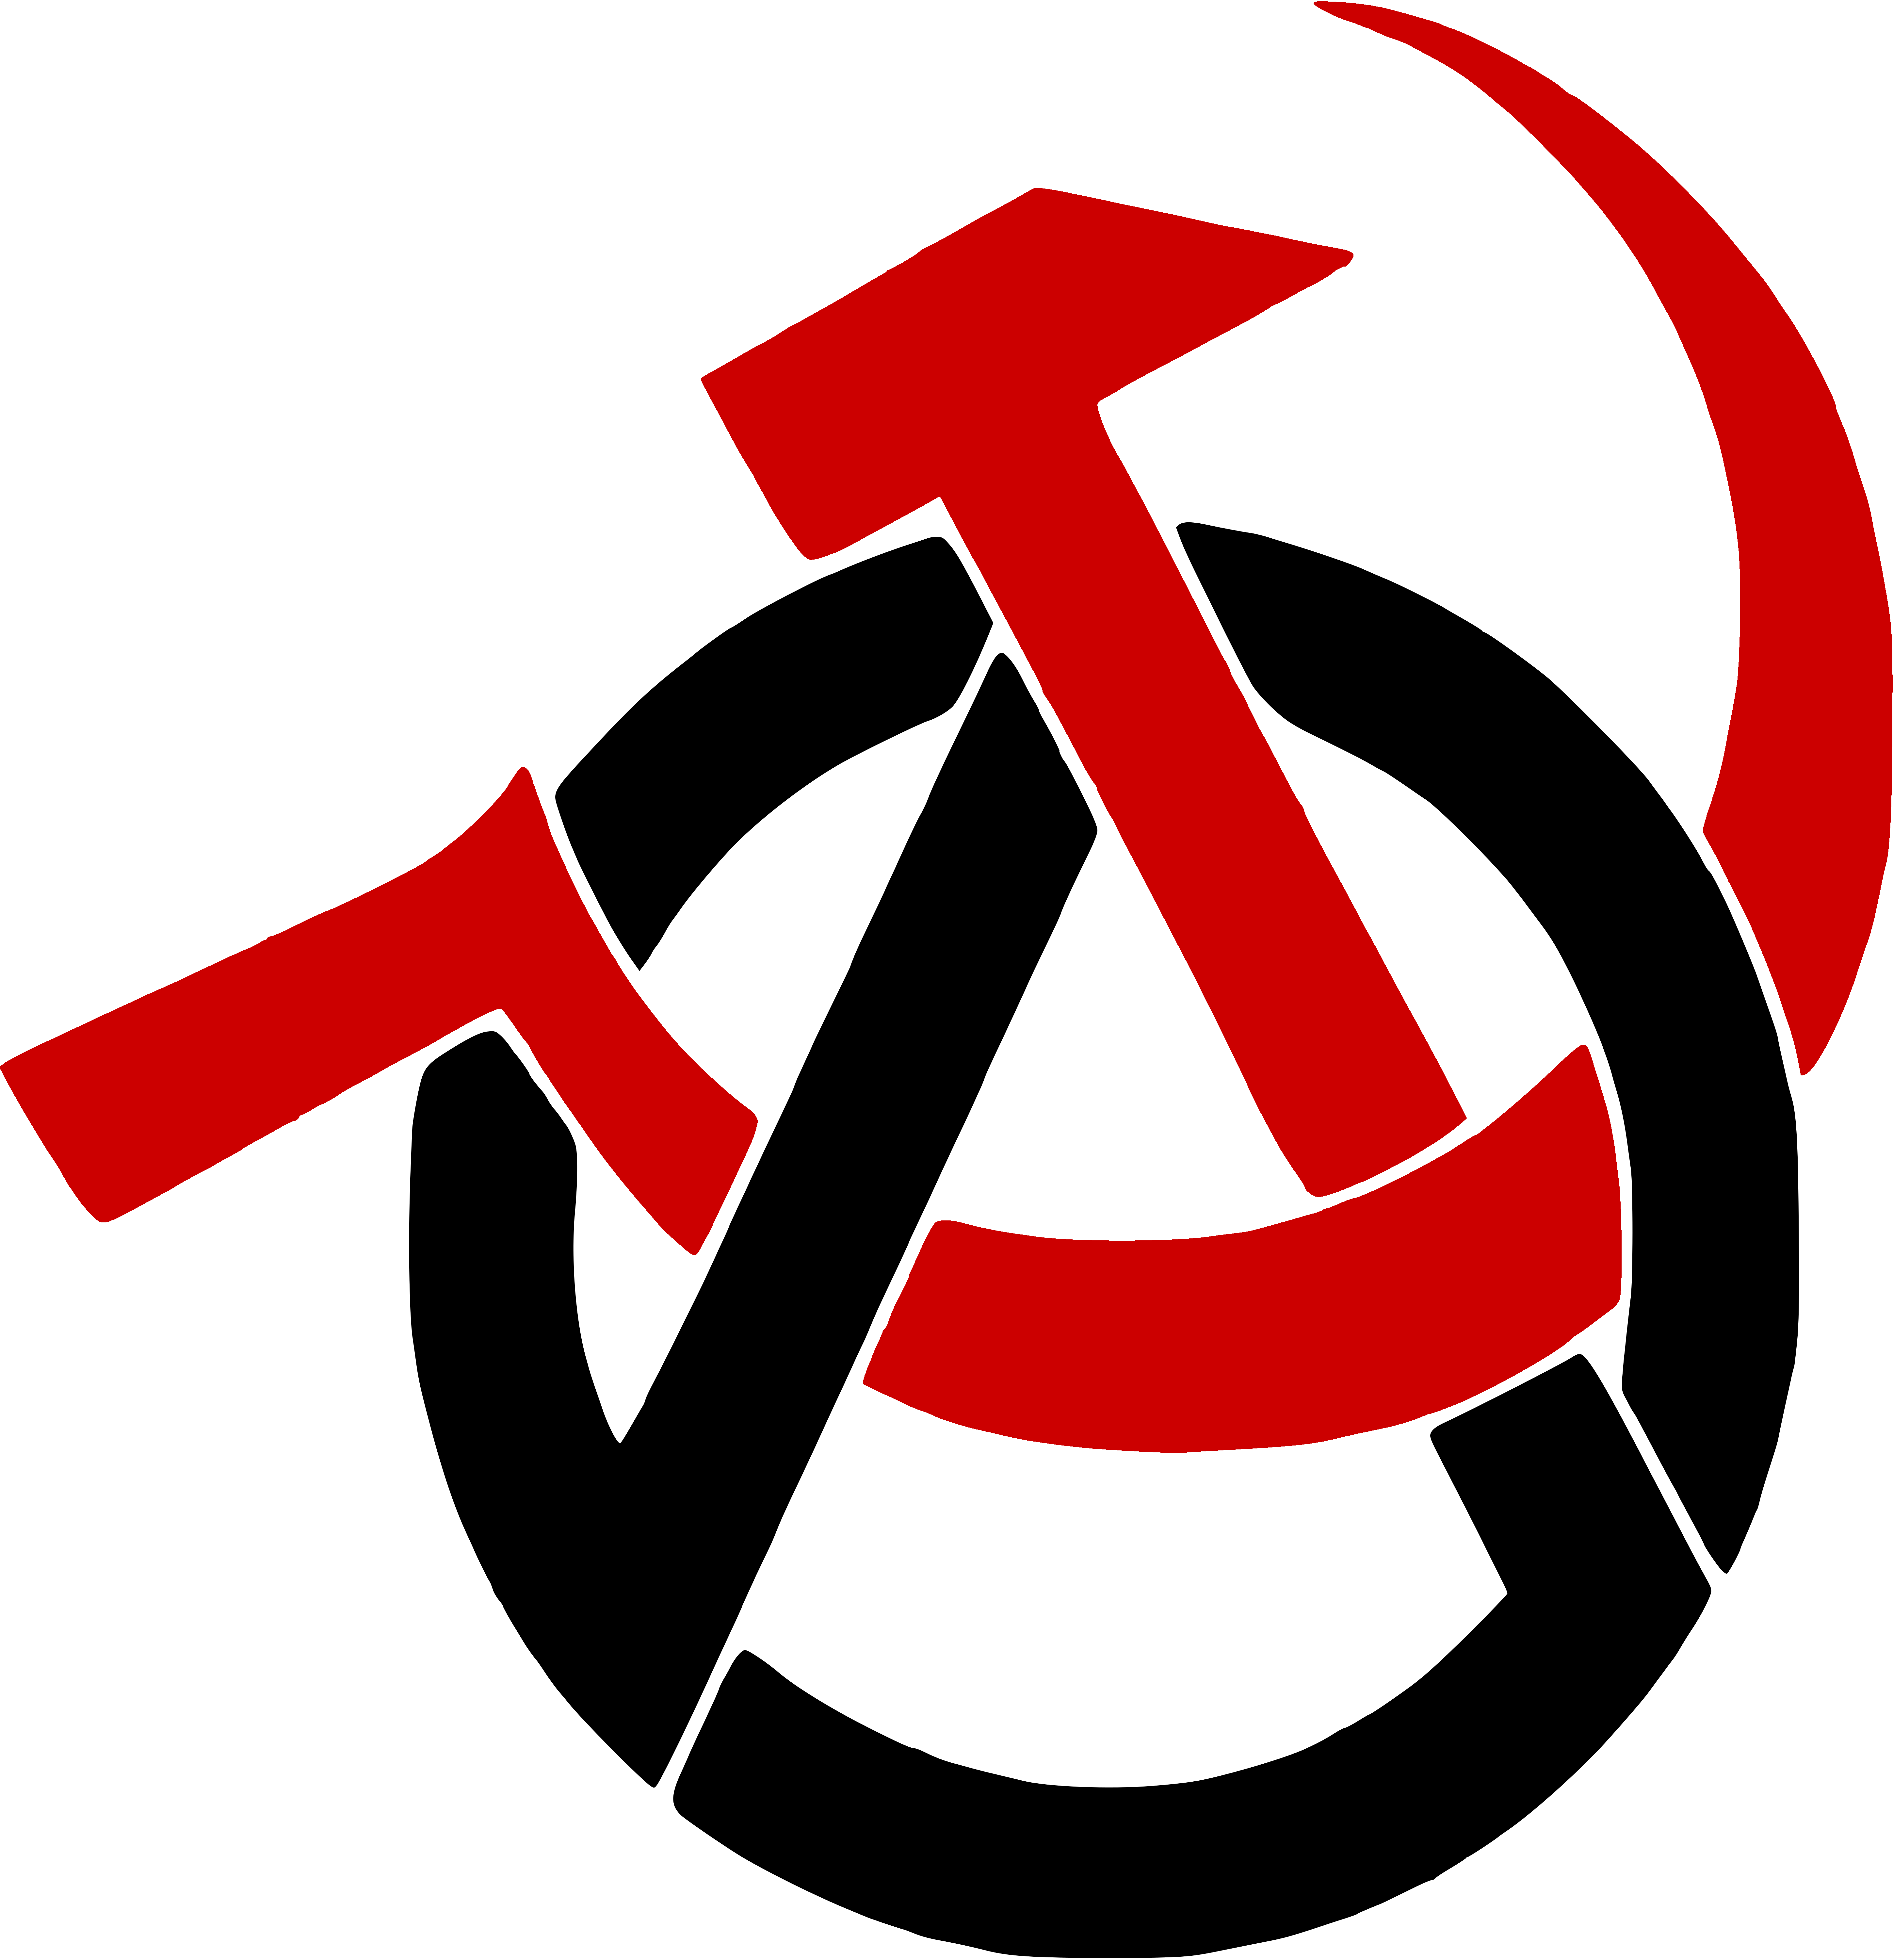 Anarcho-Communism Logo: A black A enclosed in a black circle with a red hammer and sickle replacing the middle and right side of the A